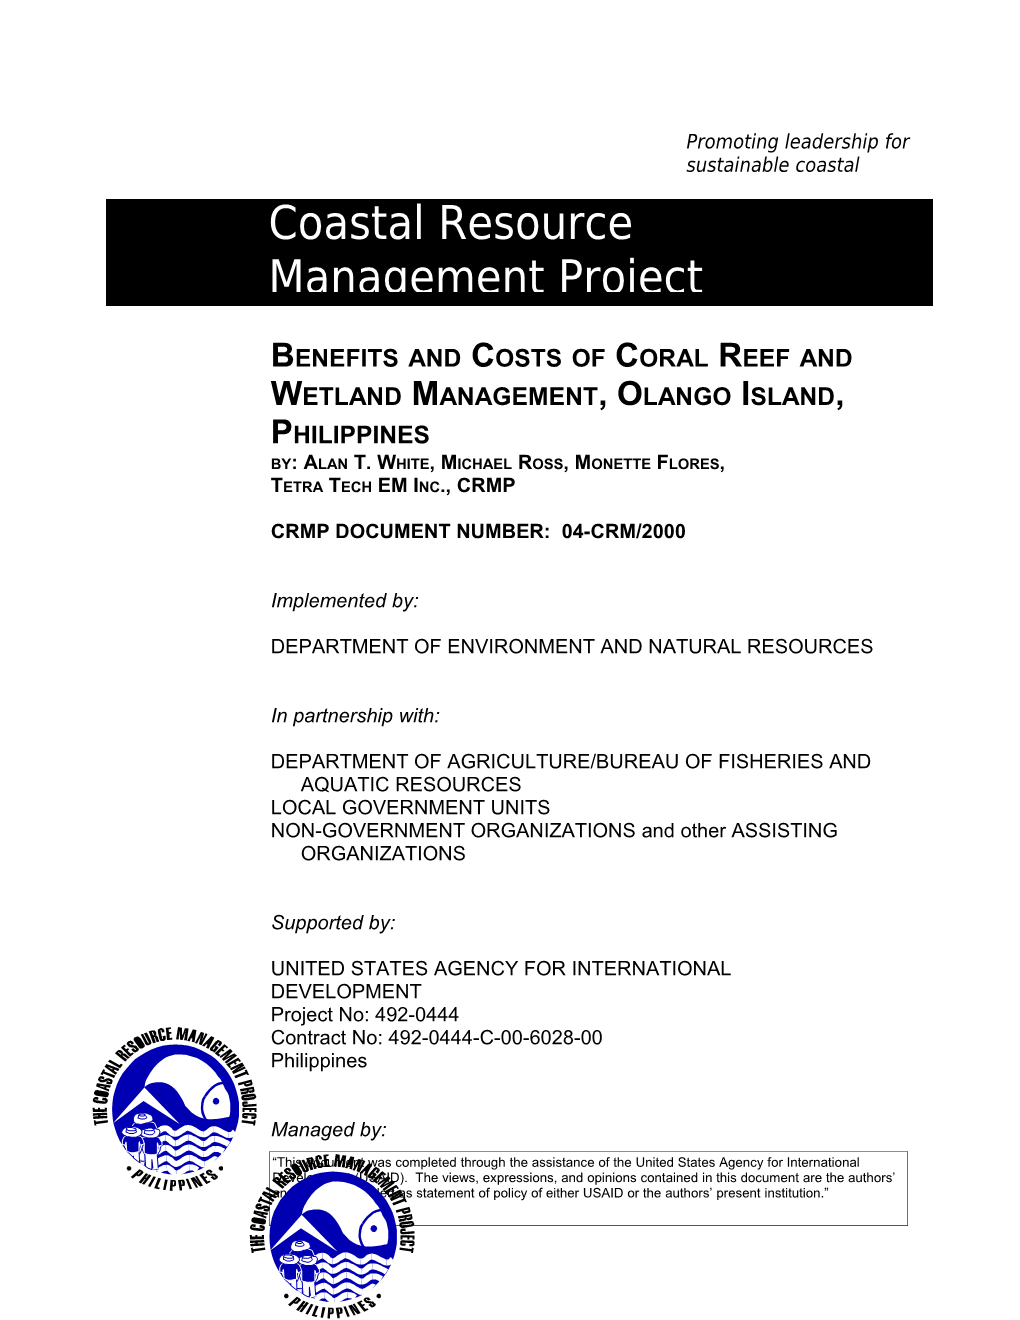 Benefits and Costs of Reef Management, Olango Island, Philippines